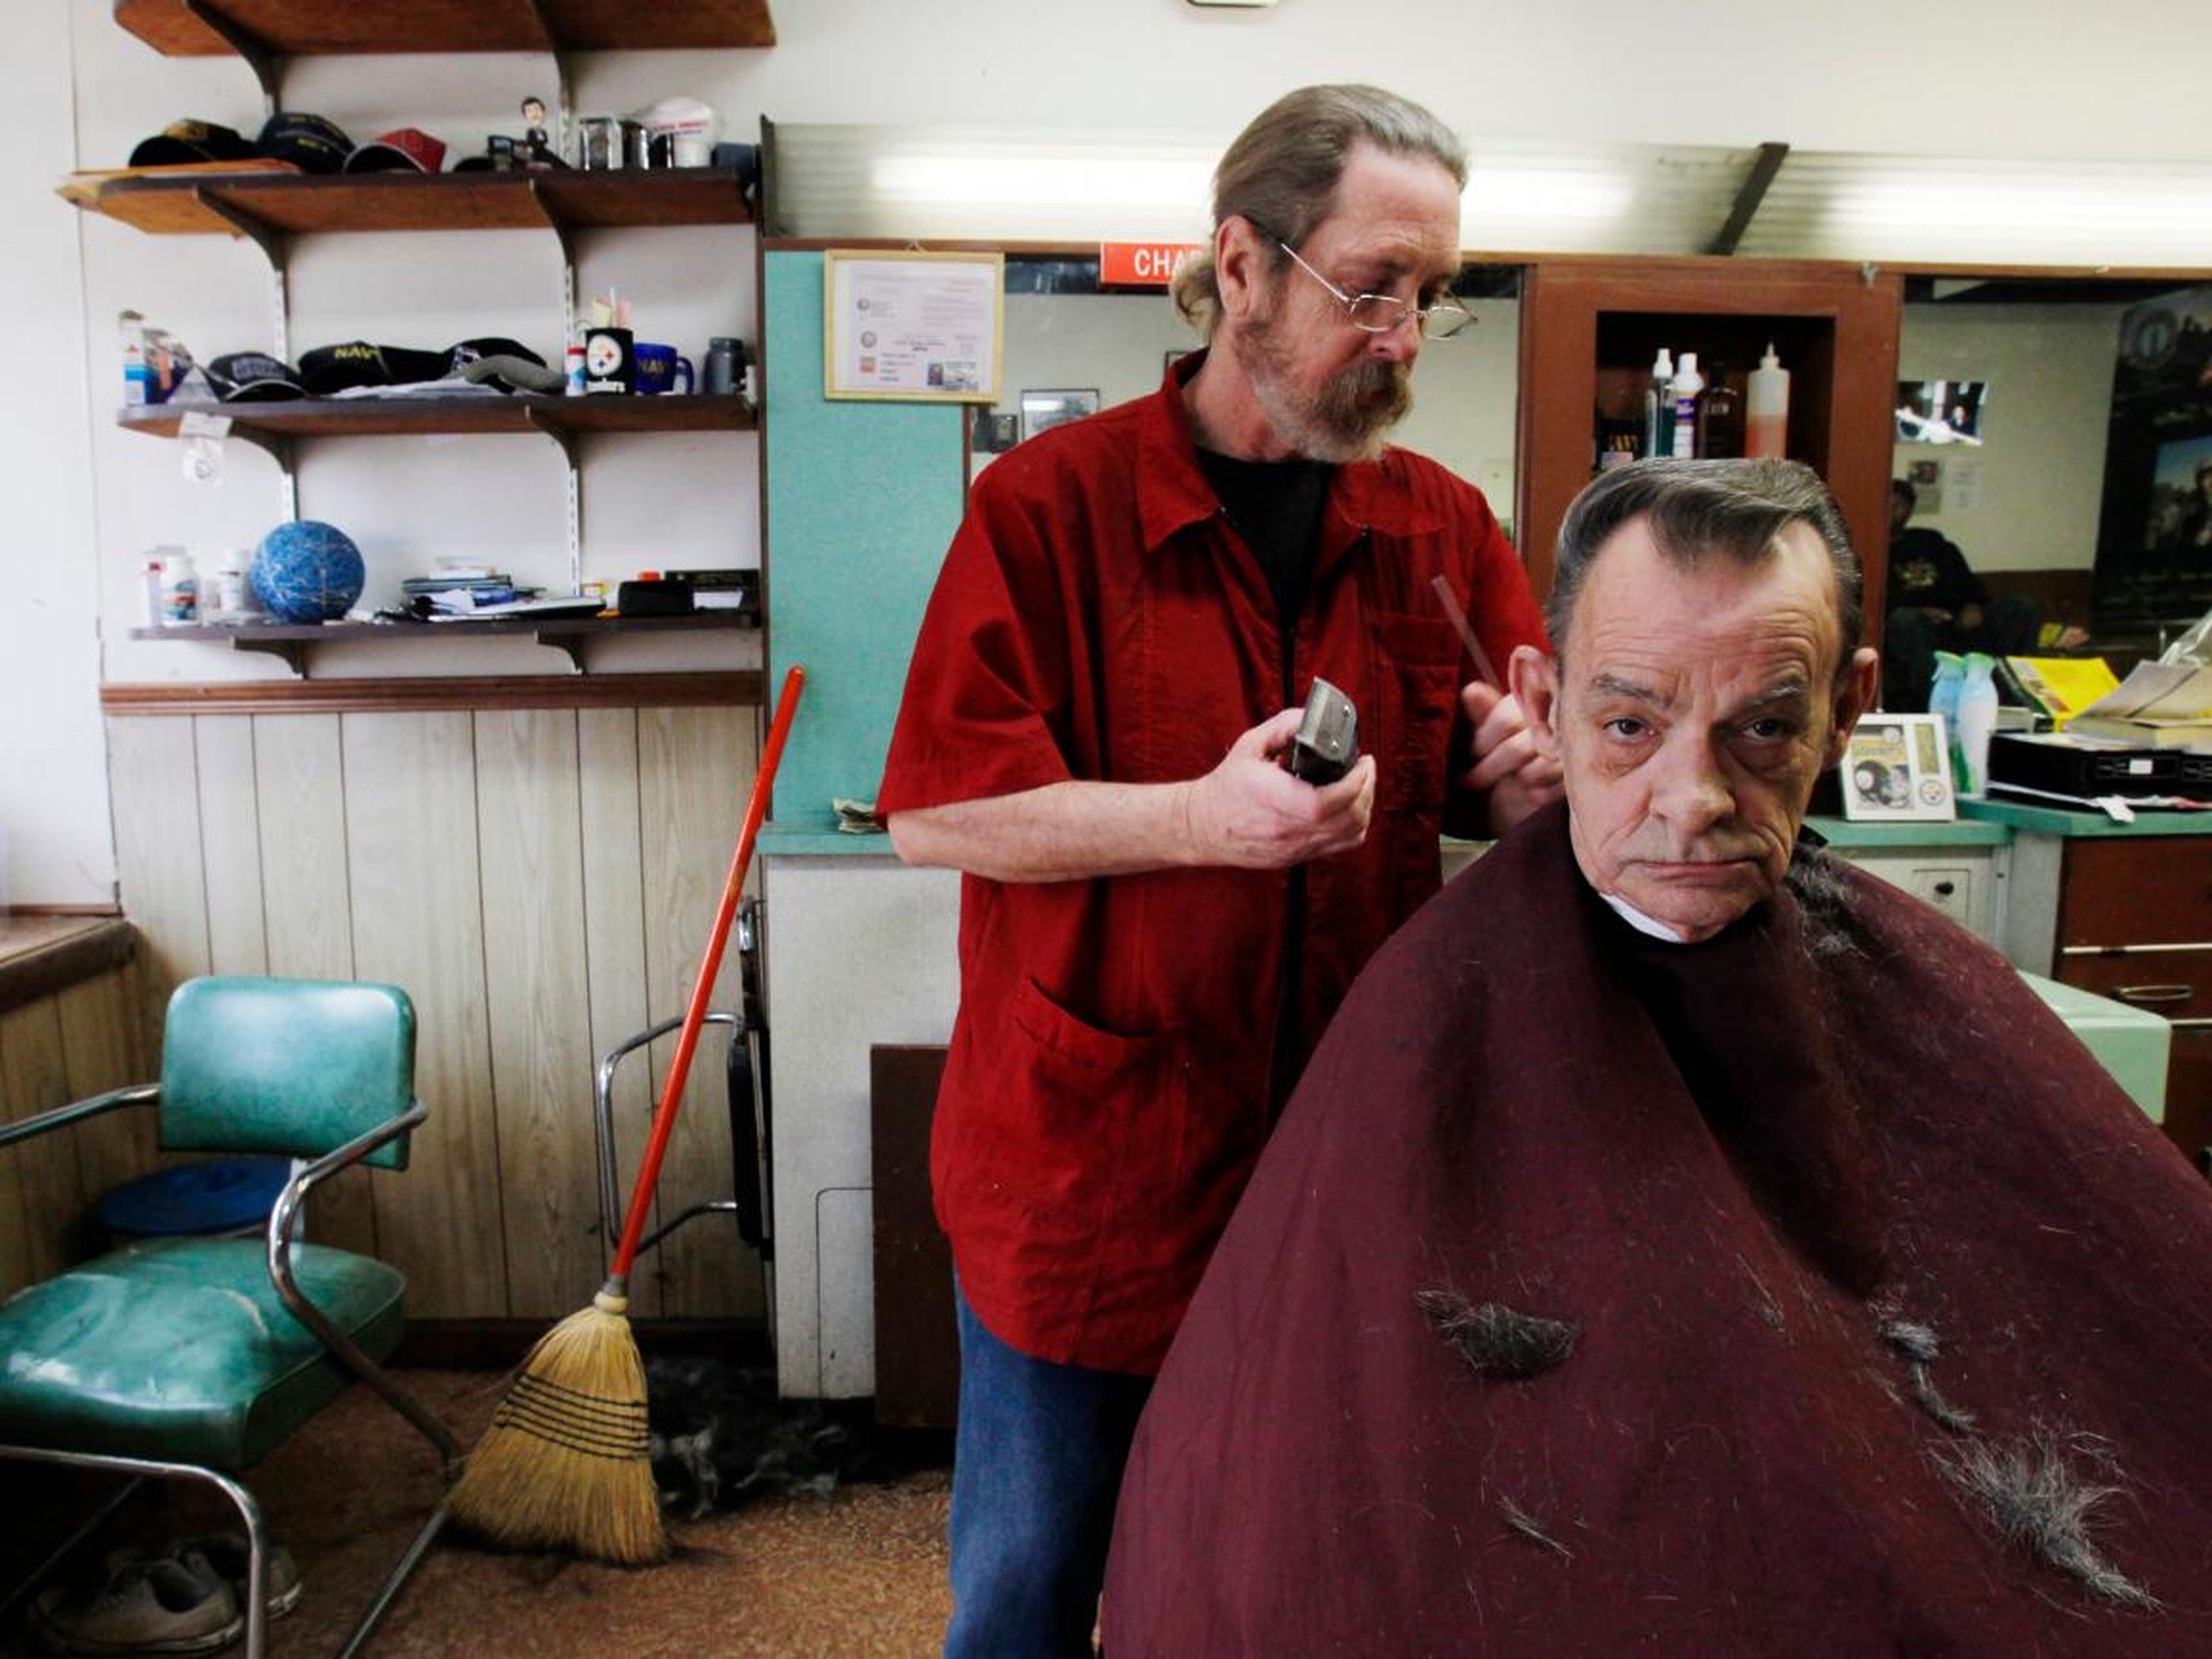 15. Barber shops had an 8% decline in employment between 2013 and 2018. 76.2% of workers in the industry in 2018 were men.